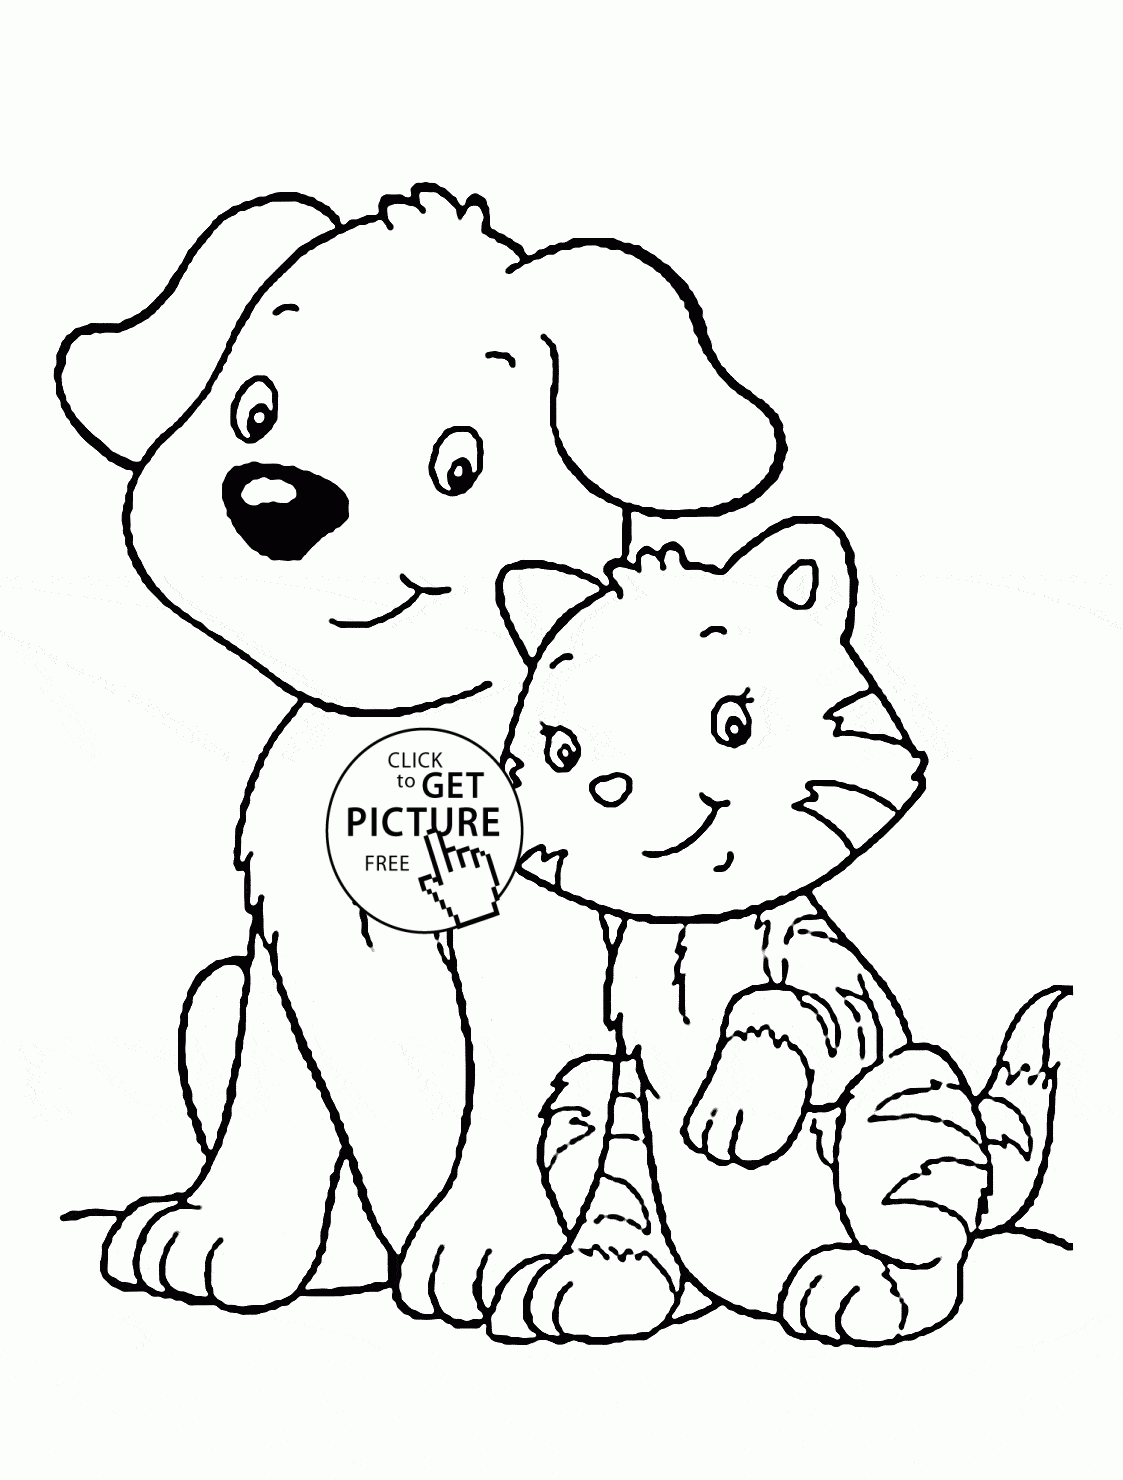 Free Printable Pictures Of Cats And Dogs